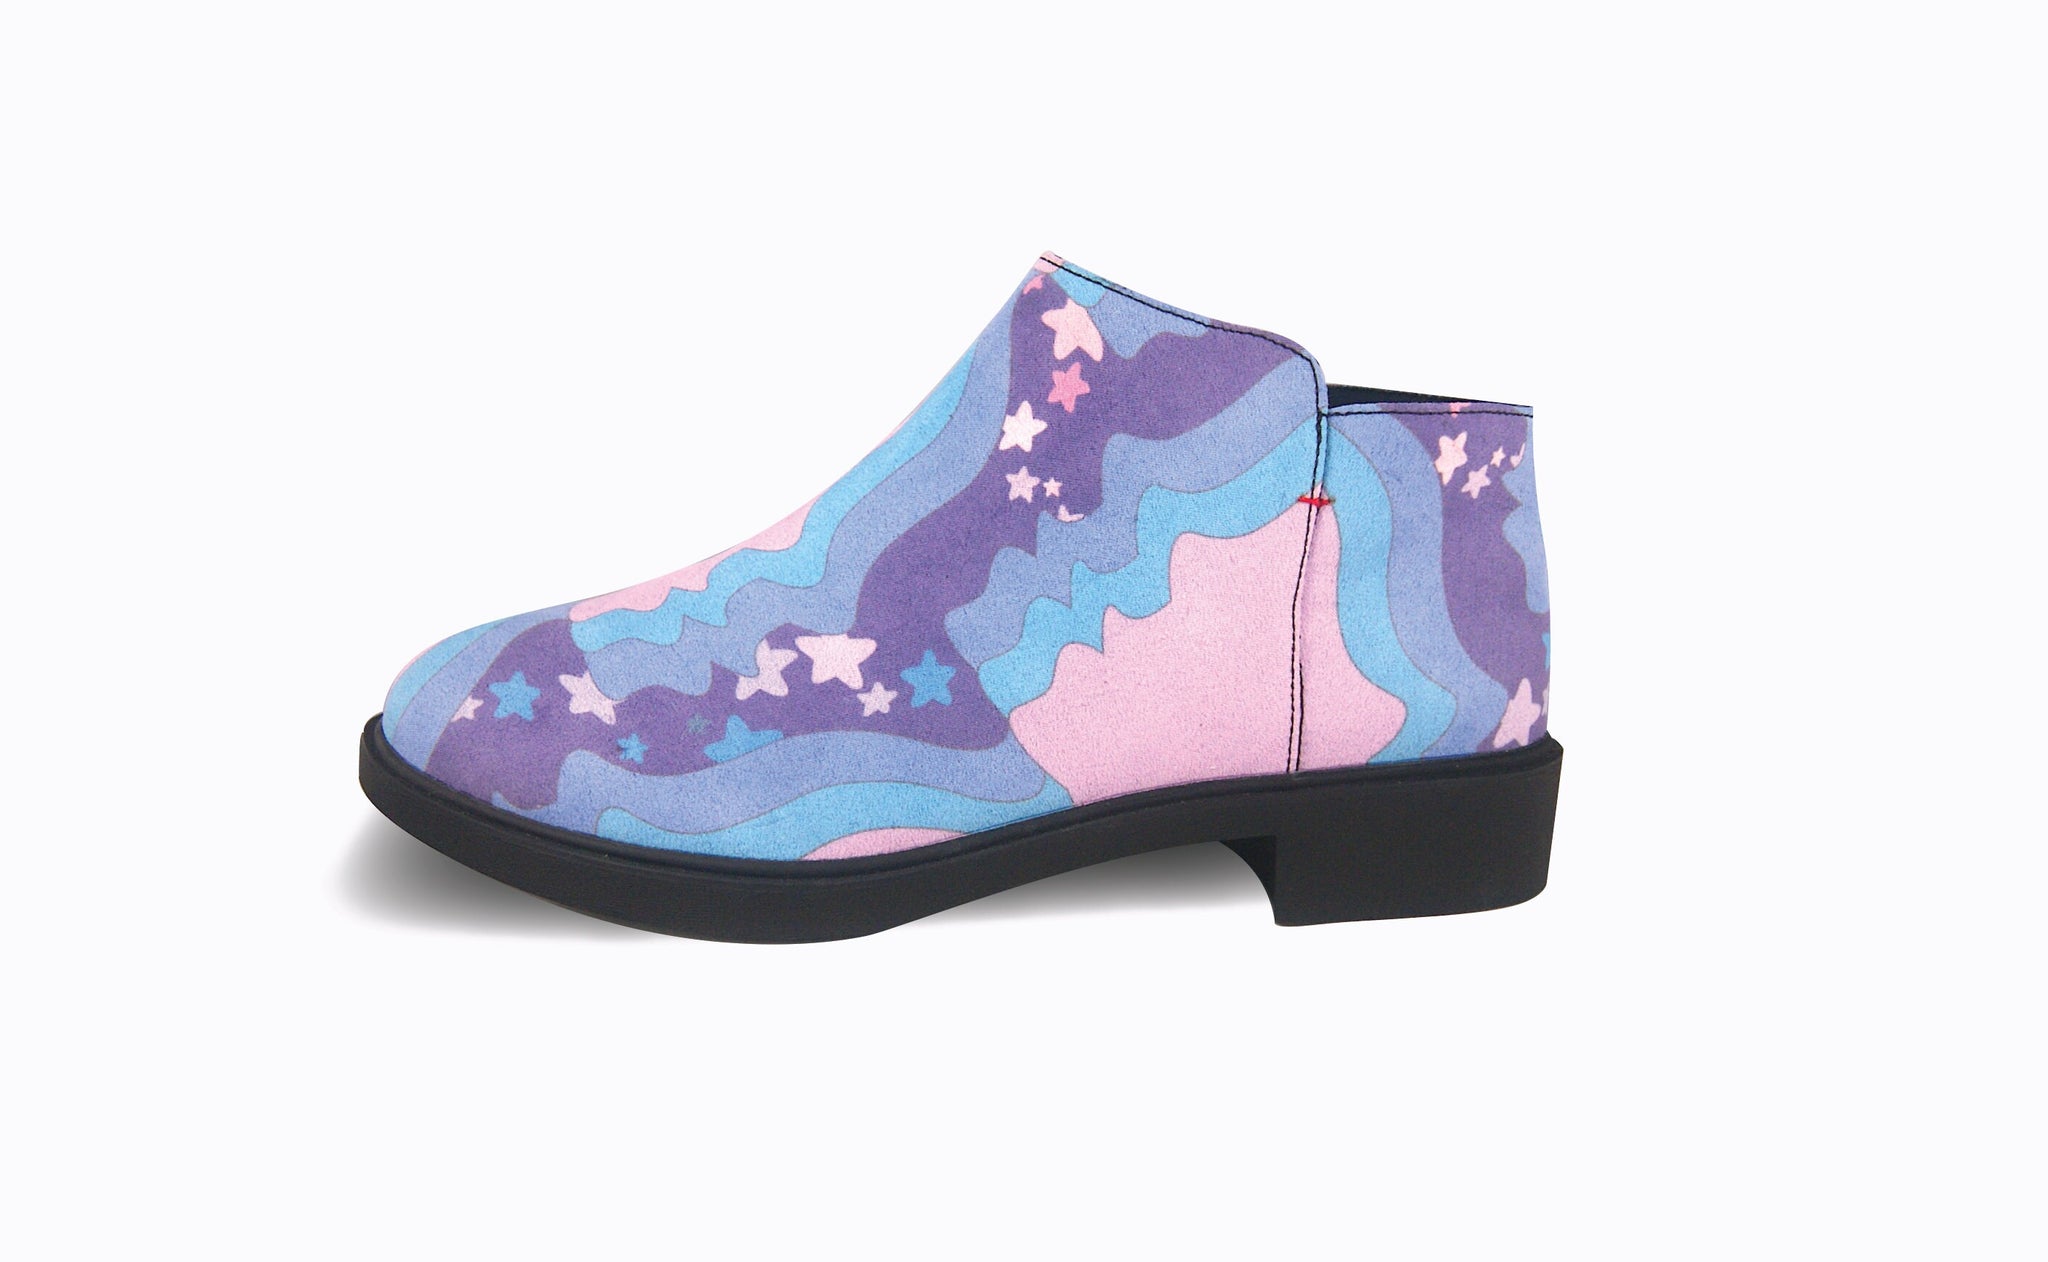 The Galaxy Glow Aura Boot | A Groovy Shoe for Dreamin' | Zippered Suede Boot with a Galactic Inspired Spaced Out Print | Goose Taffy